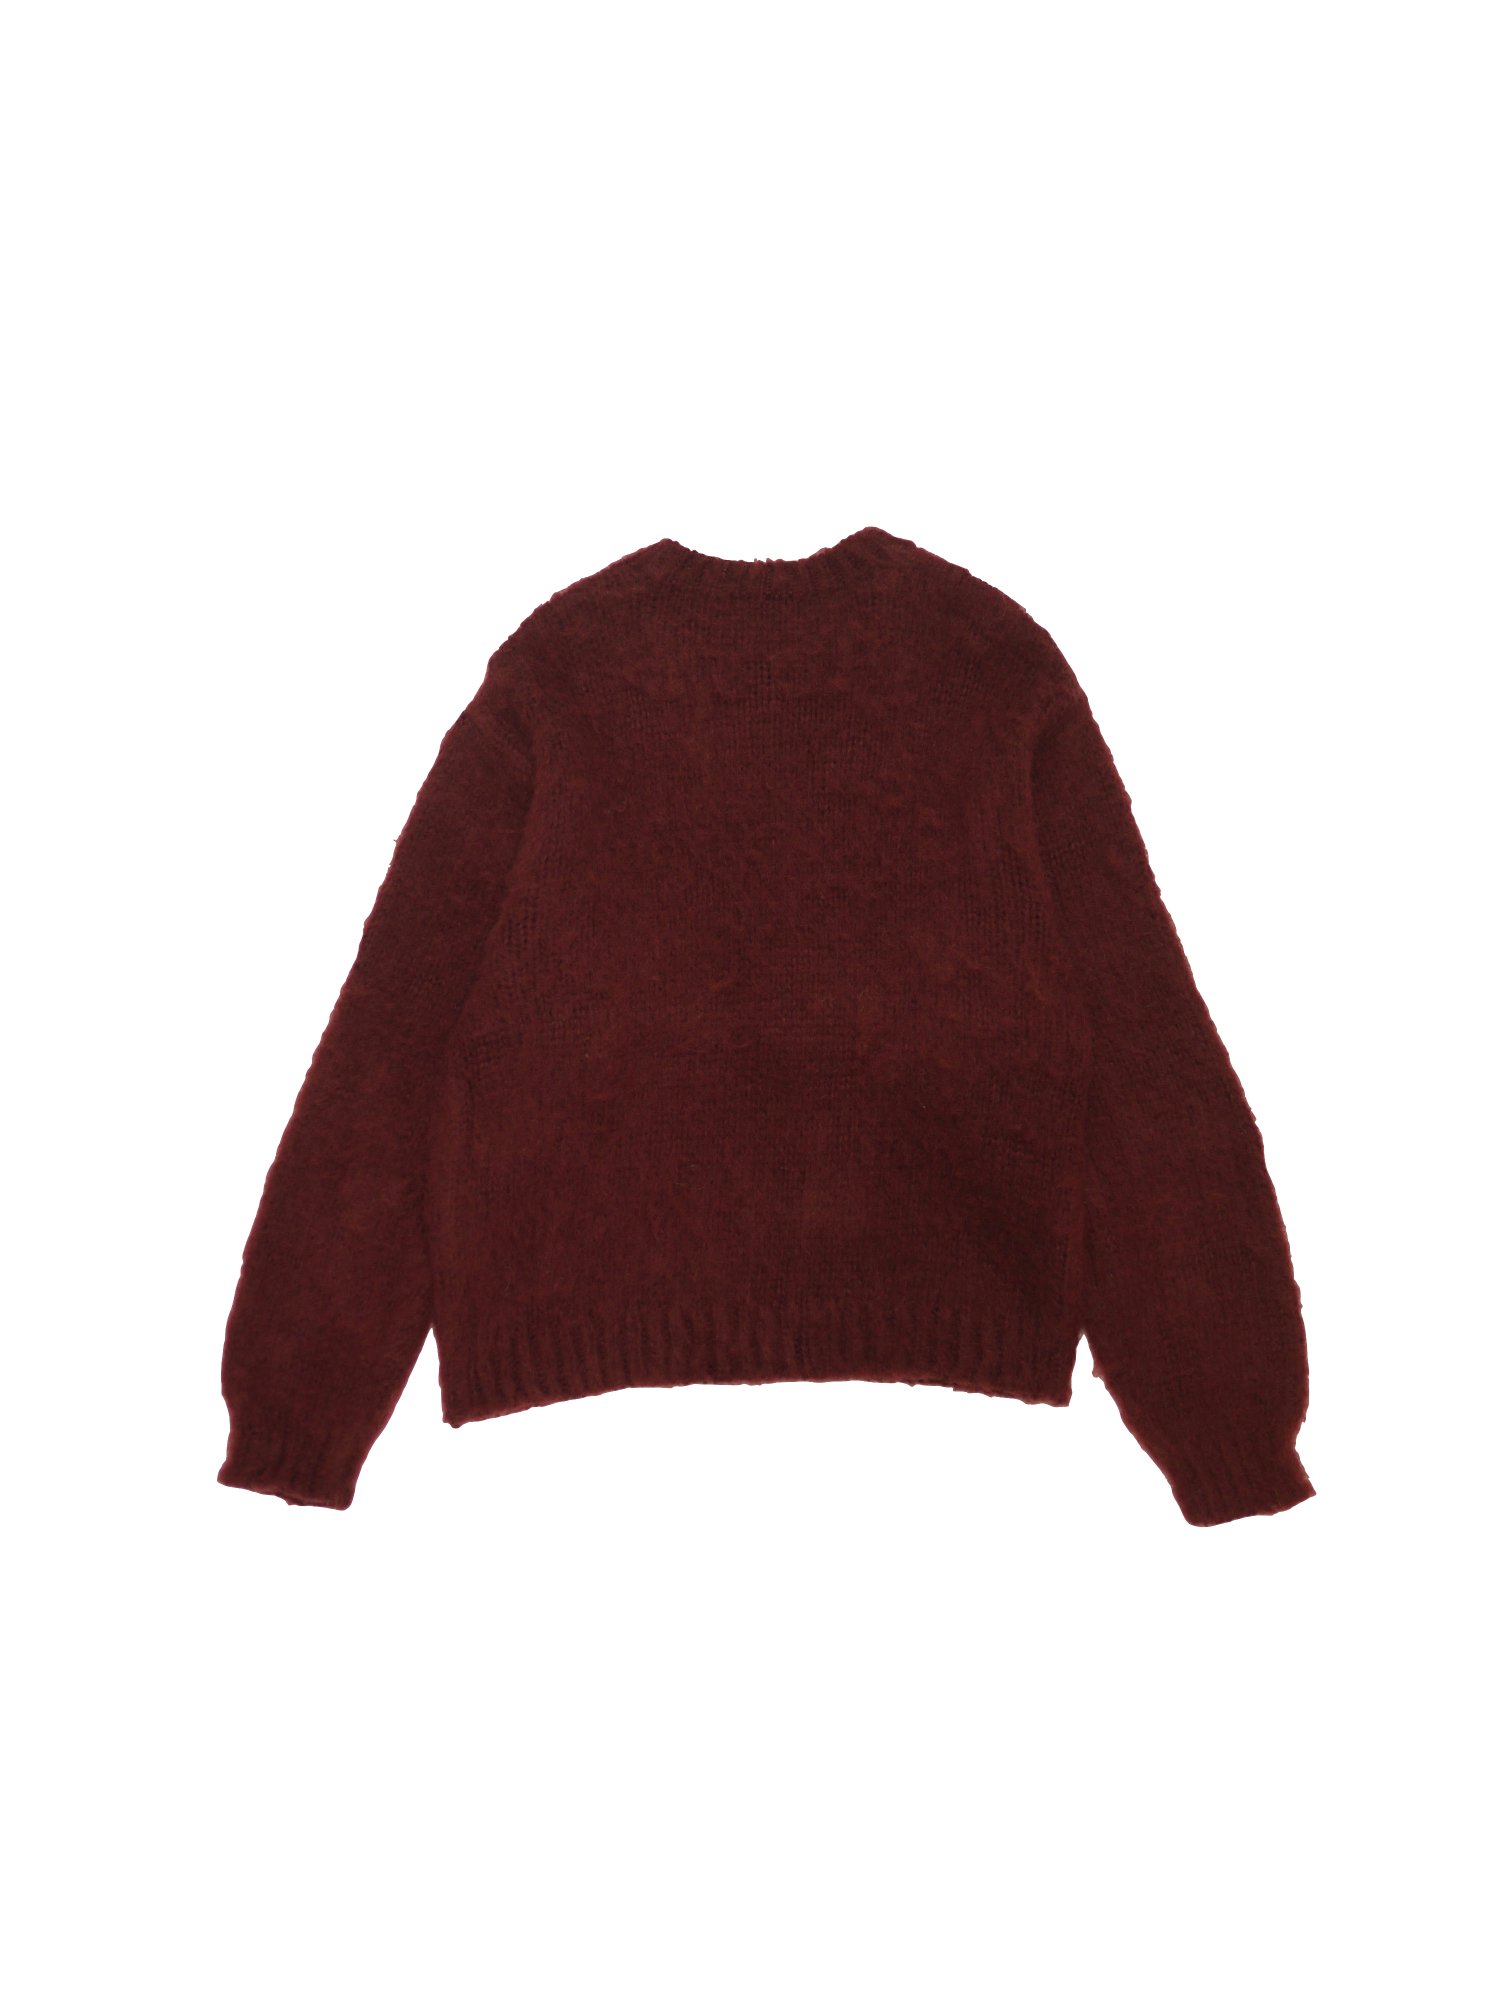 JieDa<br />MOHAIR RAINBOW KNIT / BROWN<img class='new_mark_img2' src='https://img.shop-pro.jp/img/new/icons14.gif' style='border:none;display:inline;margin:0px;padding:0px;width:auto;' />